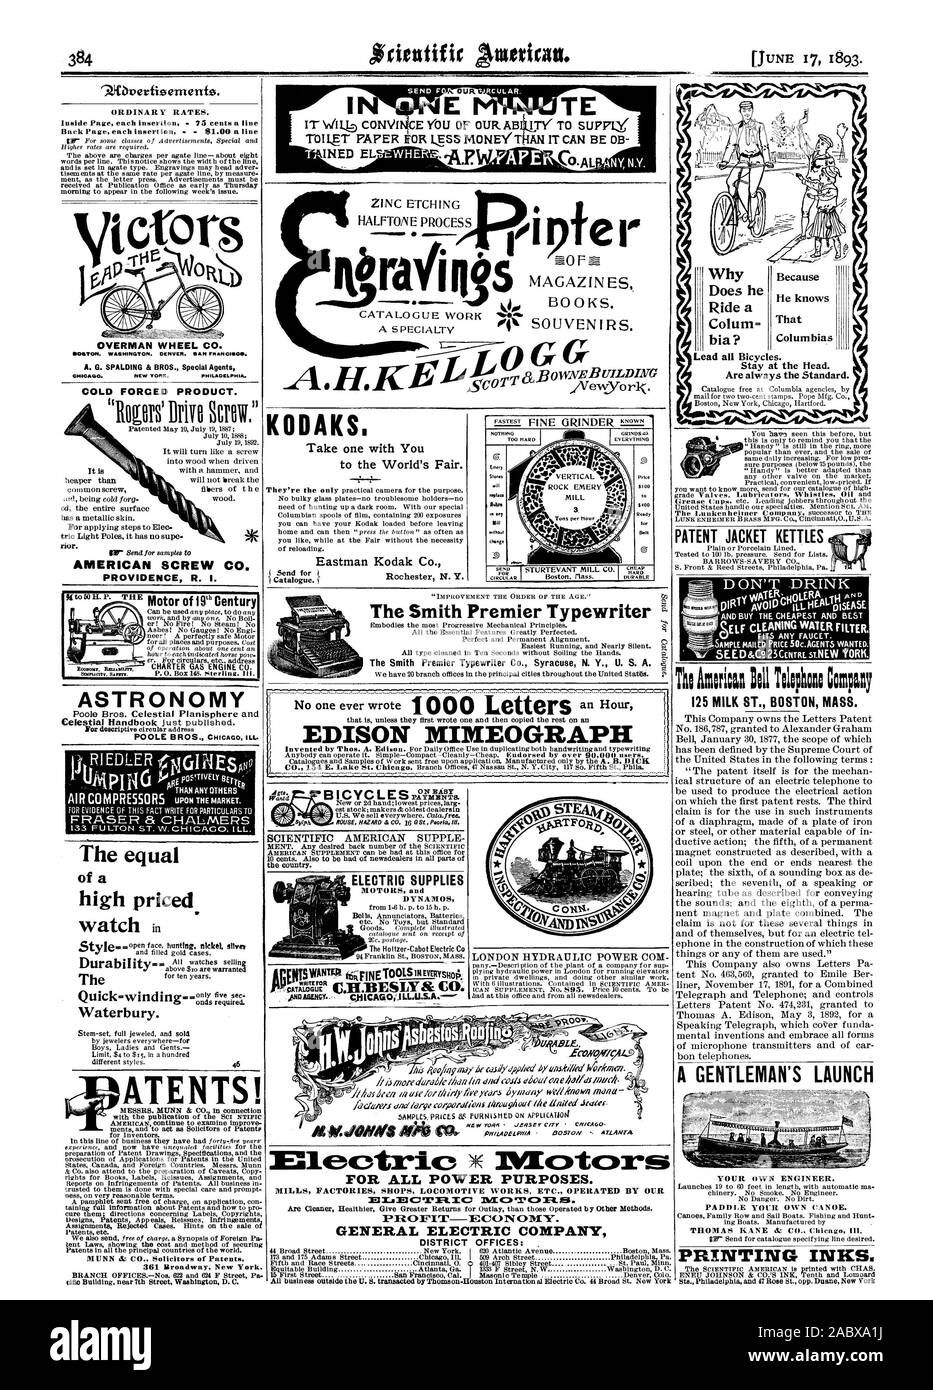 [JUNE 17 1893. !ANY N.Y. OUR ZINC ETCHING CATALOGUE WORK A SPECIALTY pfe r KODAKS. Take one with You to the World's Fair. Eastman Kodak Co. The Smith Premier Typewriter t The Smith Premier Typewriter Co. Syracuse N. Y. U. S. A. t EDISON MIMEOGRAPH ELECTRIC SUPPLIES The Holtzer-Cabot Electric C PPASENCY Sylph PHILADELPHIA  L305TON ArtAmra CHEAP DURABLE CIRCULAR KNOWN 12m 04. WV MILL e-„or 3. Ifelk Emery Stones eill replace co any NO without 'Image ATENTS! PATENT JACKET KETTLES FITS ANY FAUCET. Araricaa Bill Tollphou Campy PRINTING INKS. OVERMAN WHEEL CO. SOSTON. WASHINGTON. DENVER. SAN FR AN Stock Photo